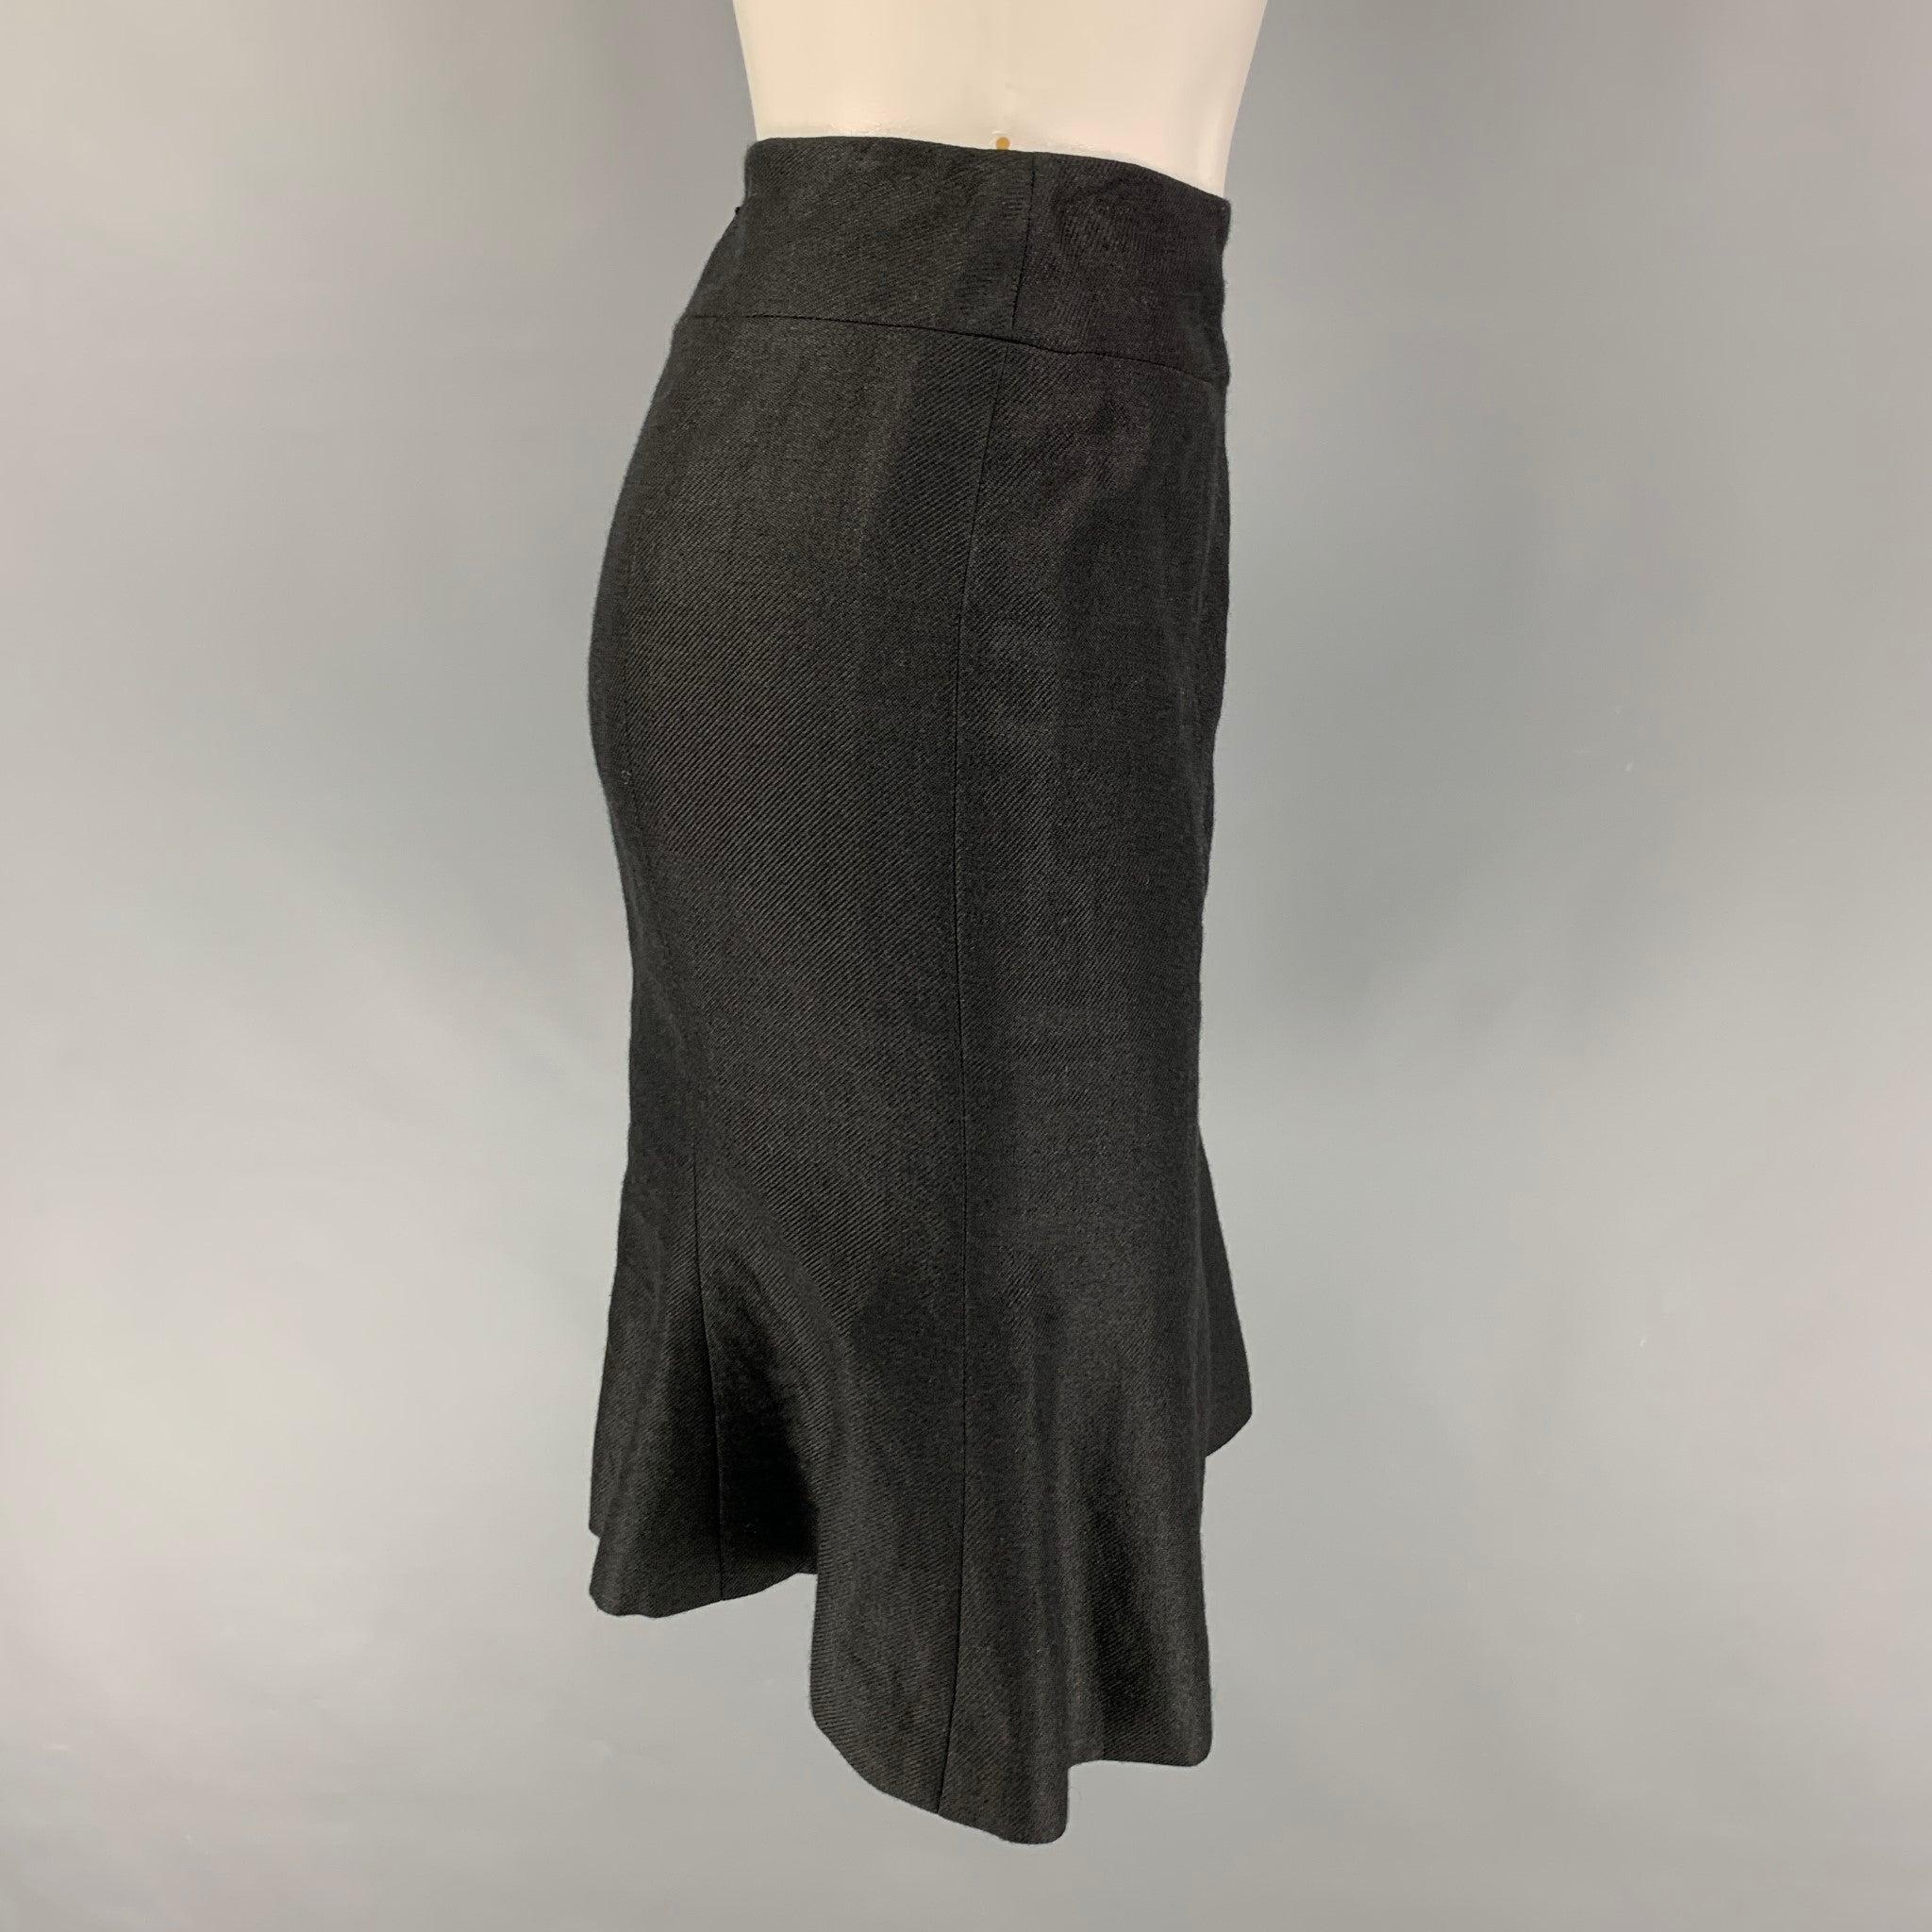 CHANEL skirt comes in a black linen featuring a trumpet style, logo emblem, and a back zipper closure. Made in France.
Very Good
Pre-Owned Condition. 

Marked:   AL716 05C / 36 

Measurements: 
  Waist: 28 inches  Hip: 35 inches  Length: 21.5 inches